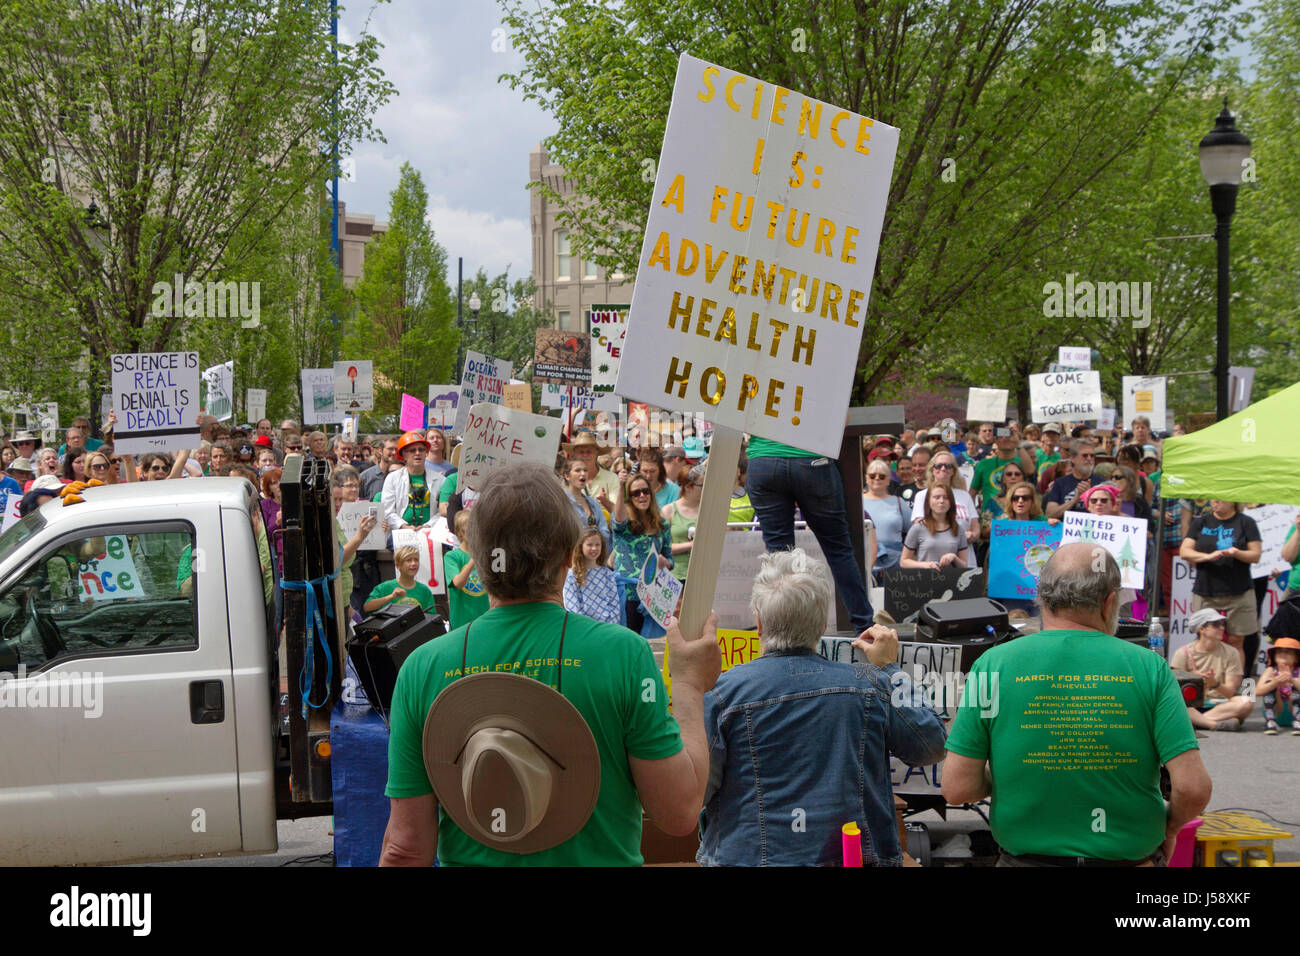 Asheville, North Carolina, USA - April 22, 2017: A large, heterogeneous crowd of demonstrators holding signs gather to demonstrate for science in down Stock Photo